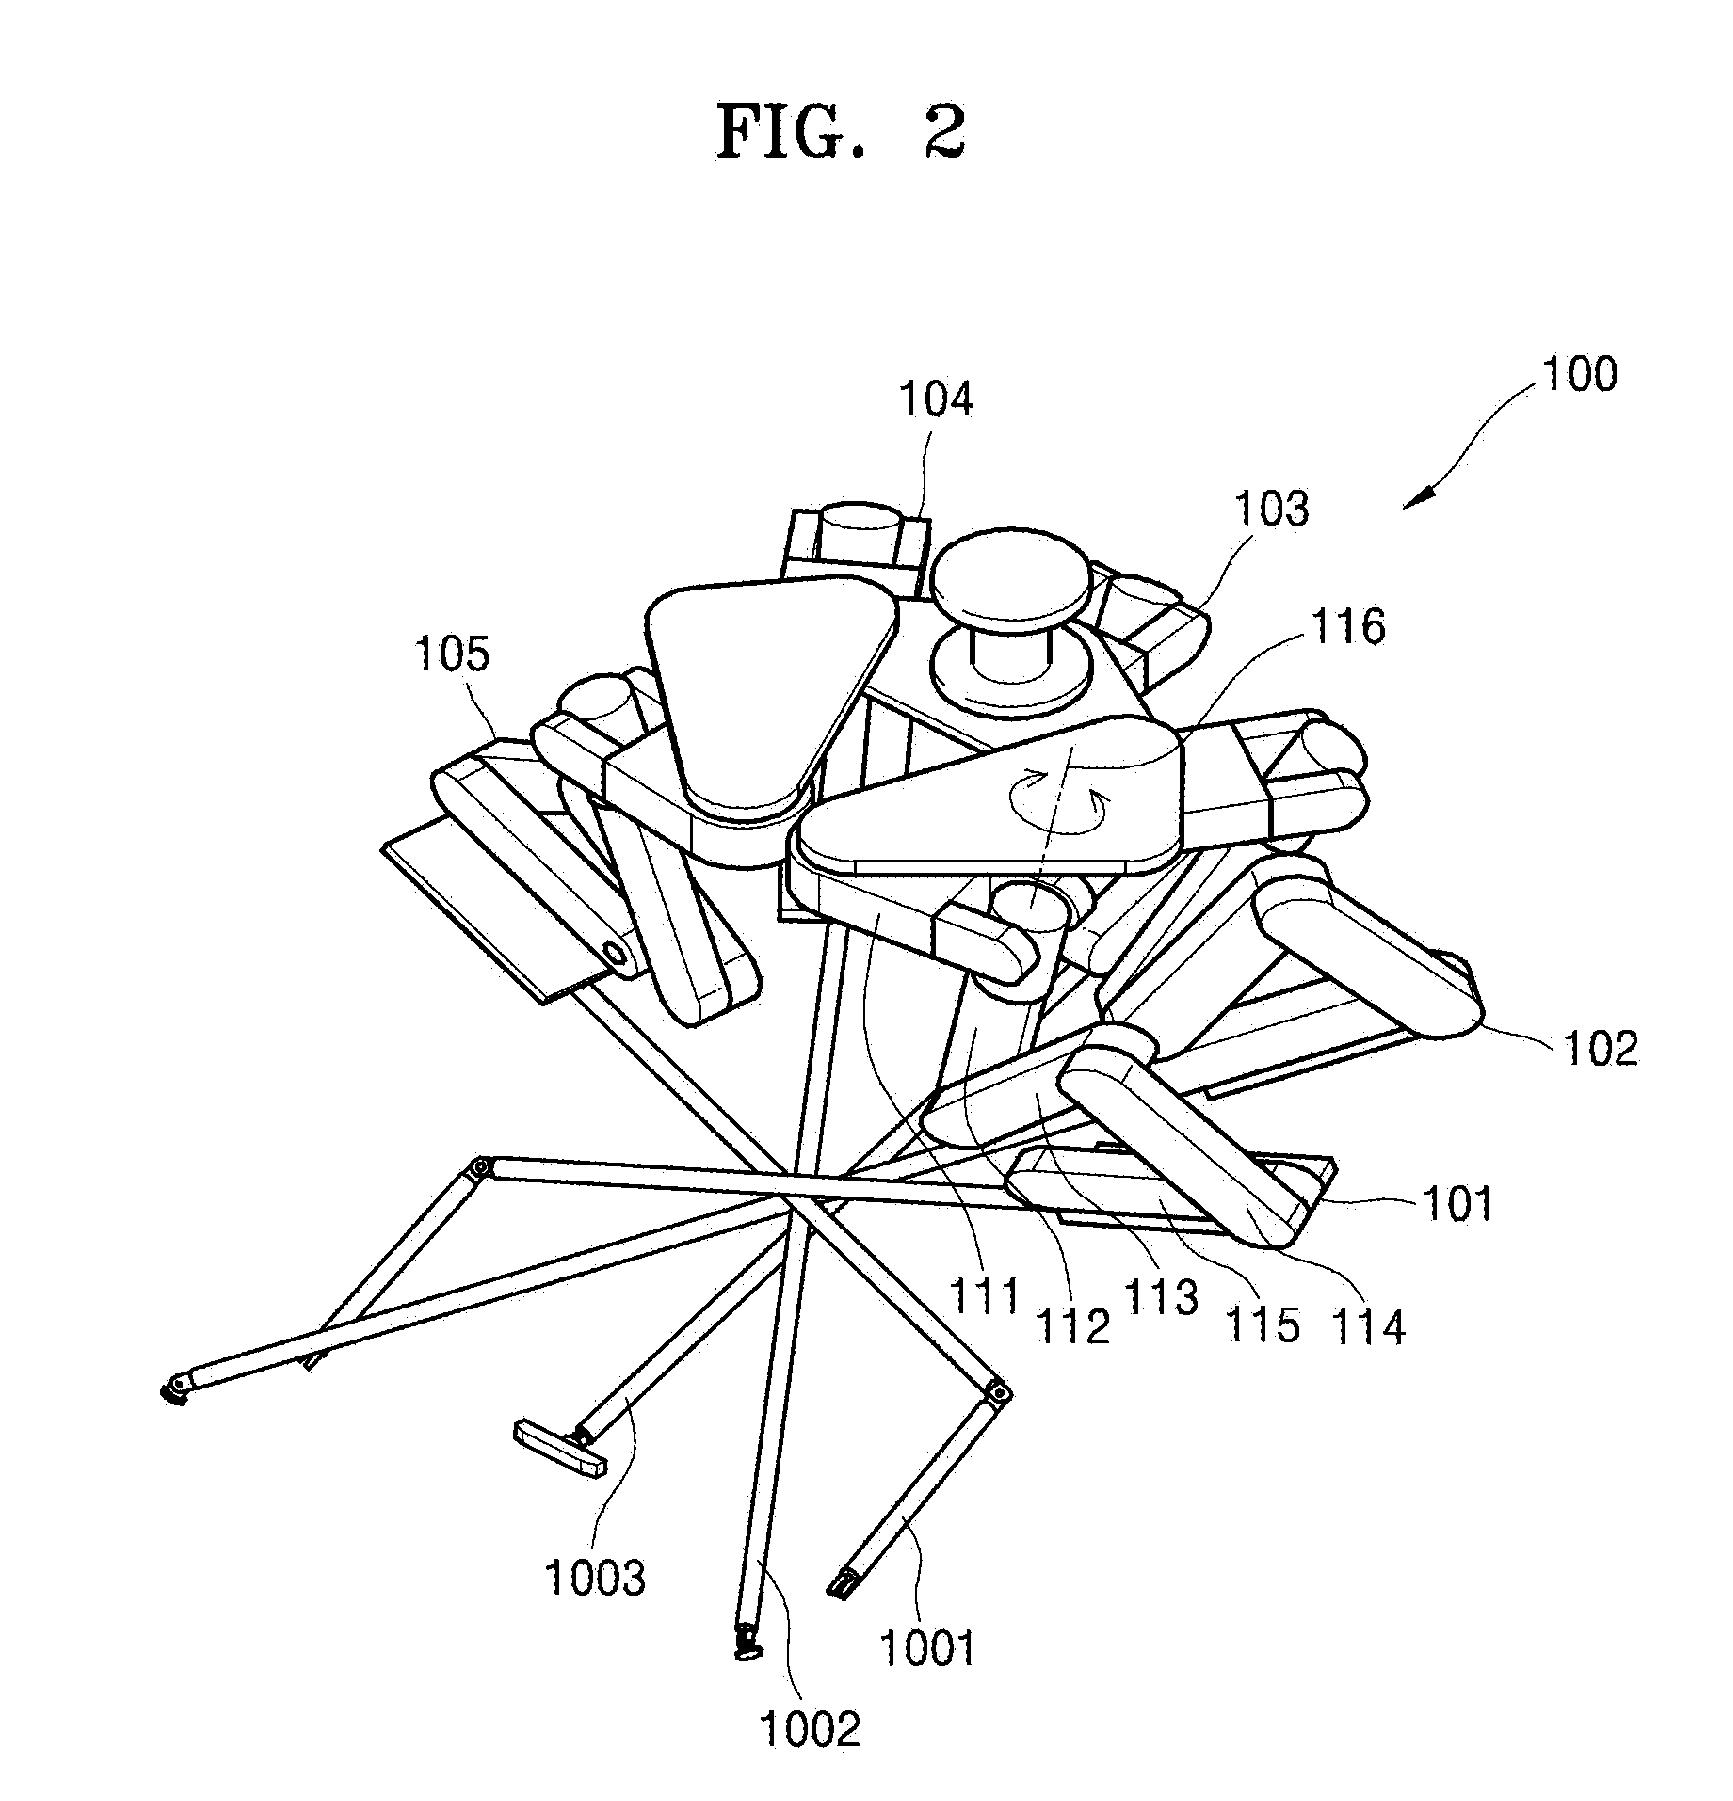 Surgical robot system and method of operating the same